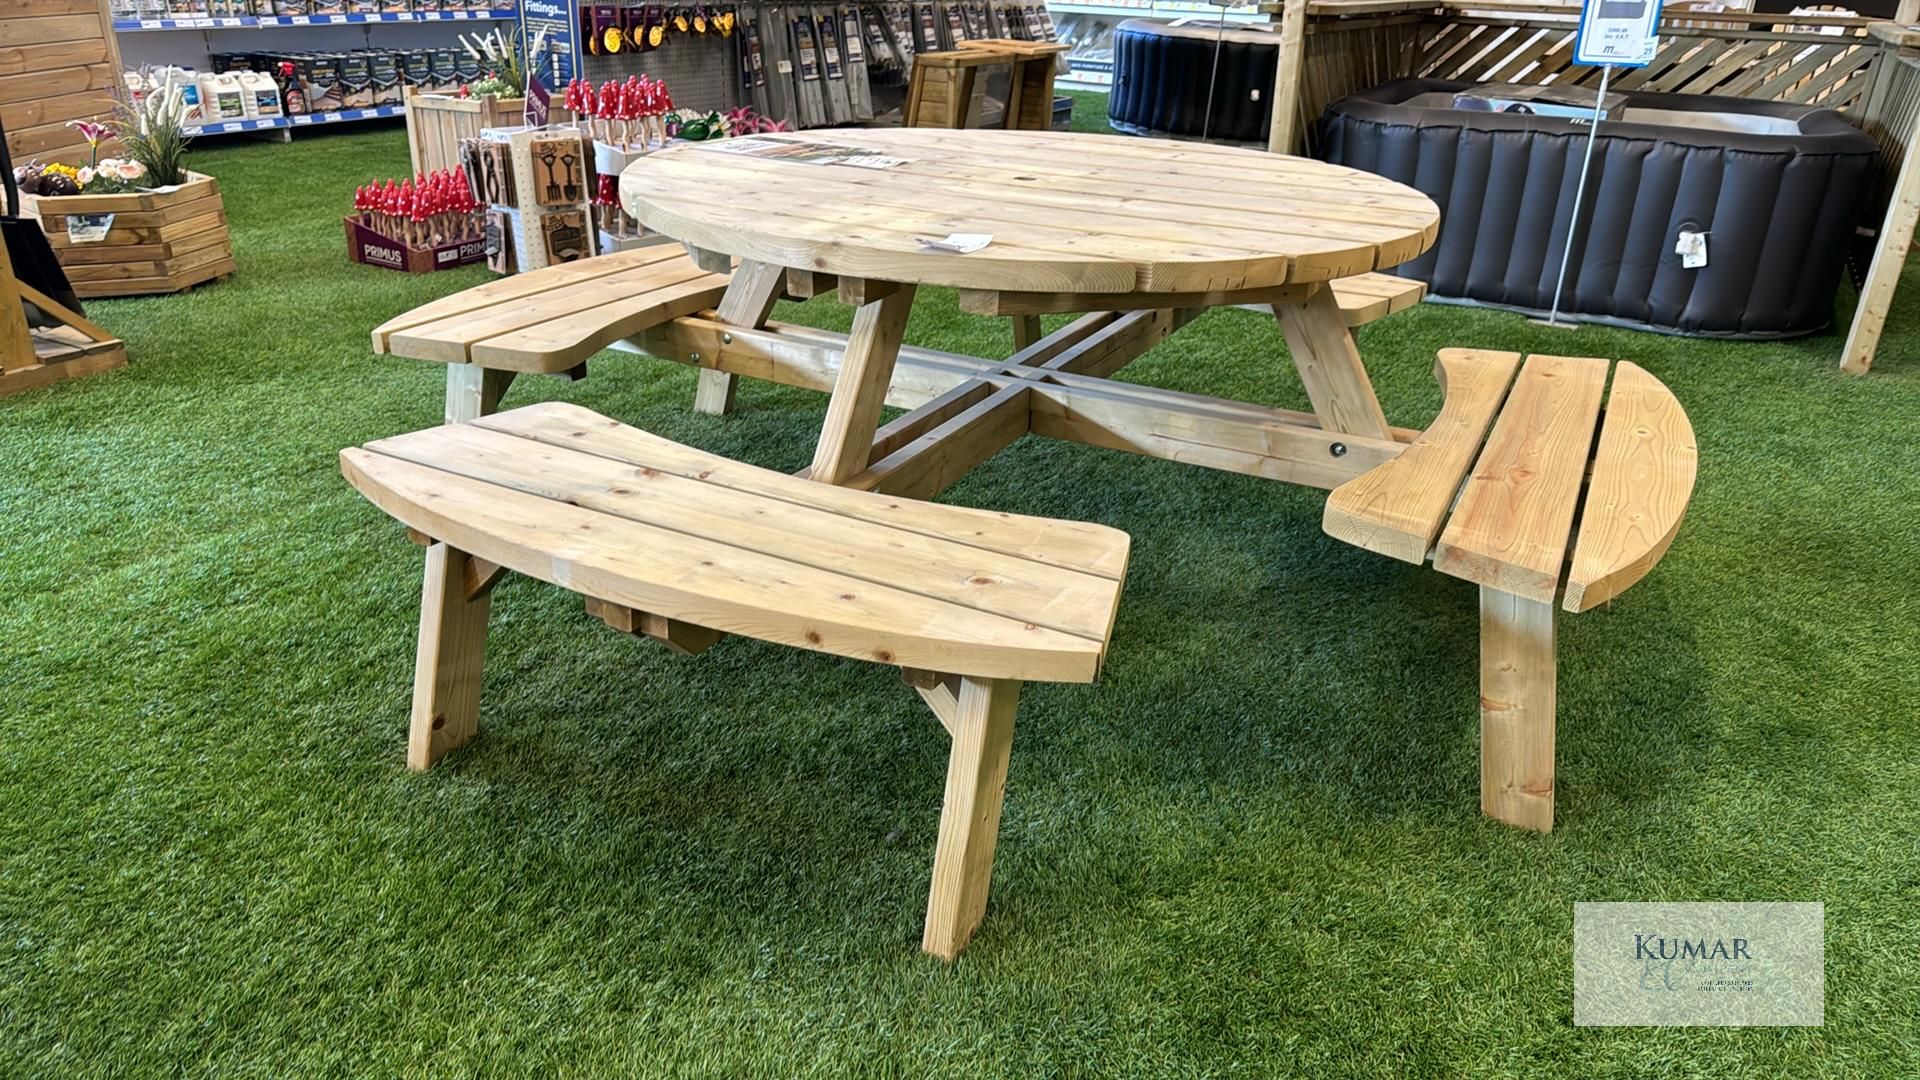 Rose Round Picnic Table w2.10m x h 2.23m, RRP £555.99 - Image 7 of 8